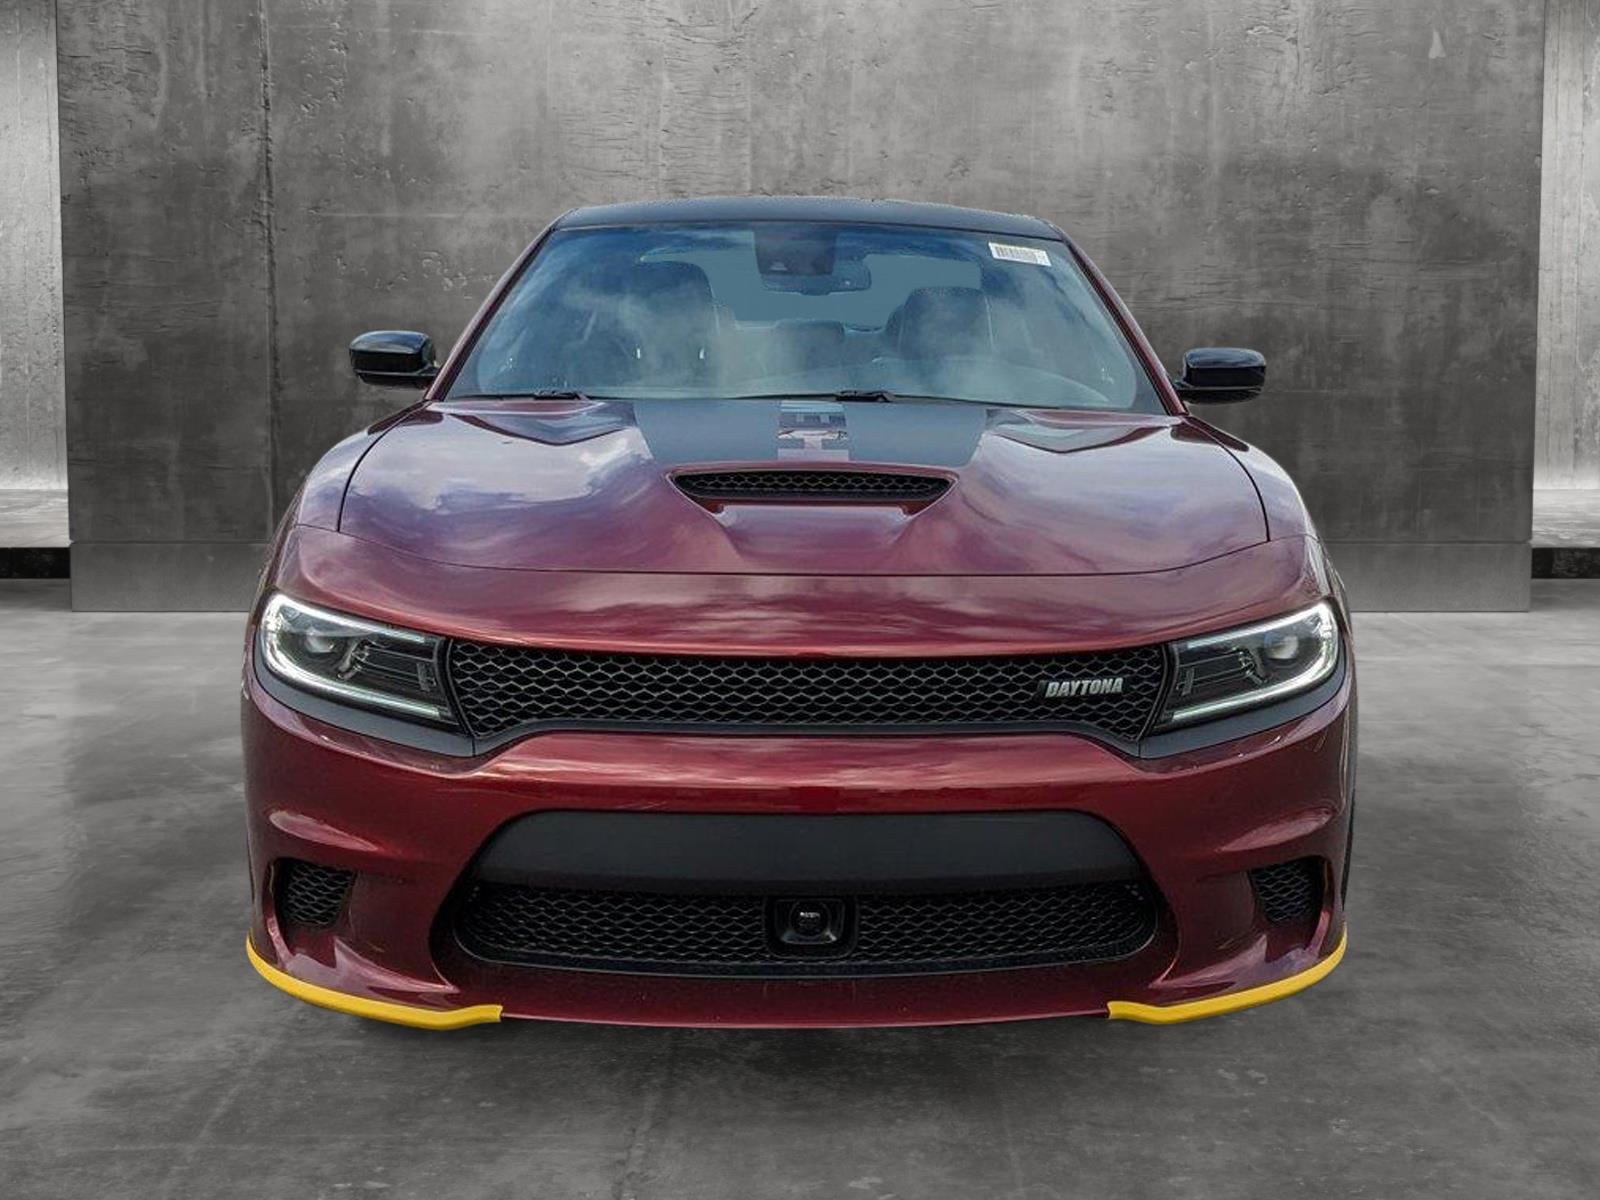 Dodge Charger #5 Hero Image